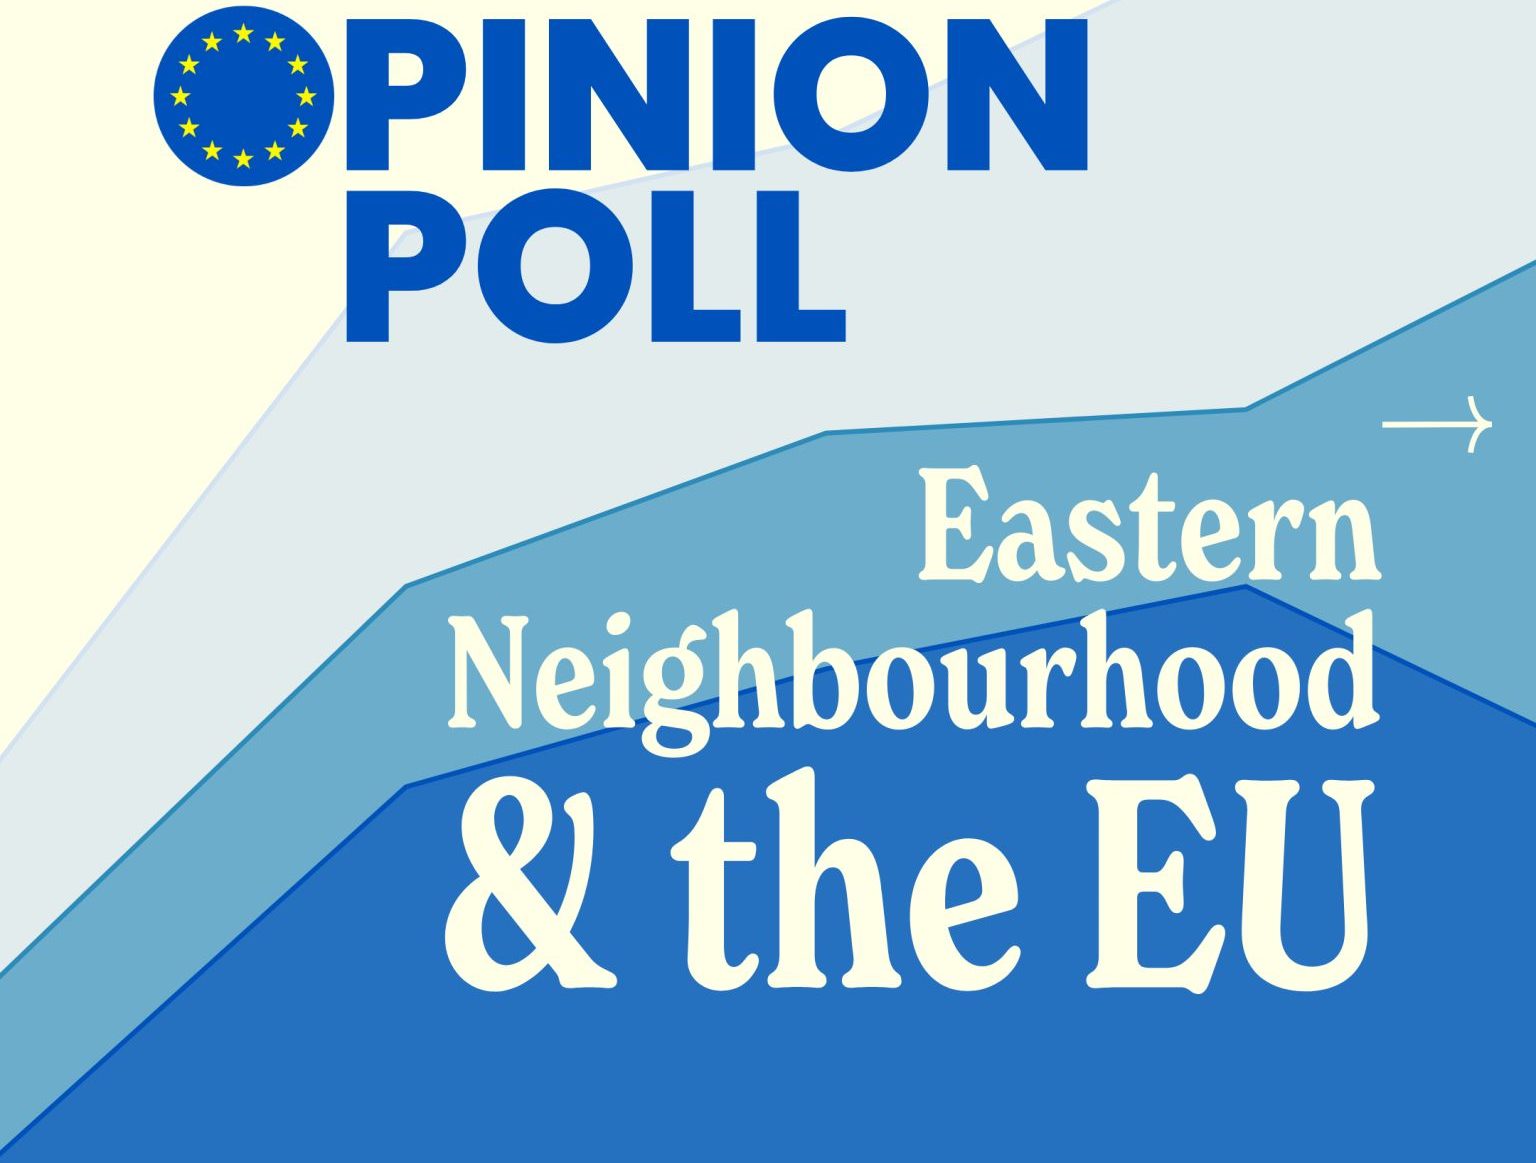 EU retains high trust levels across the Eastern partner countries, opinion polls find